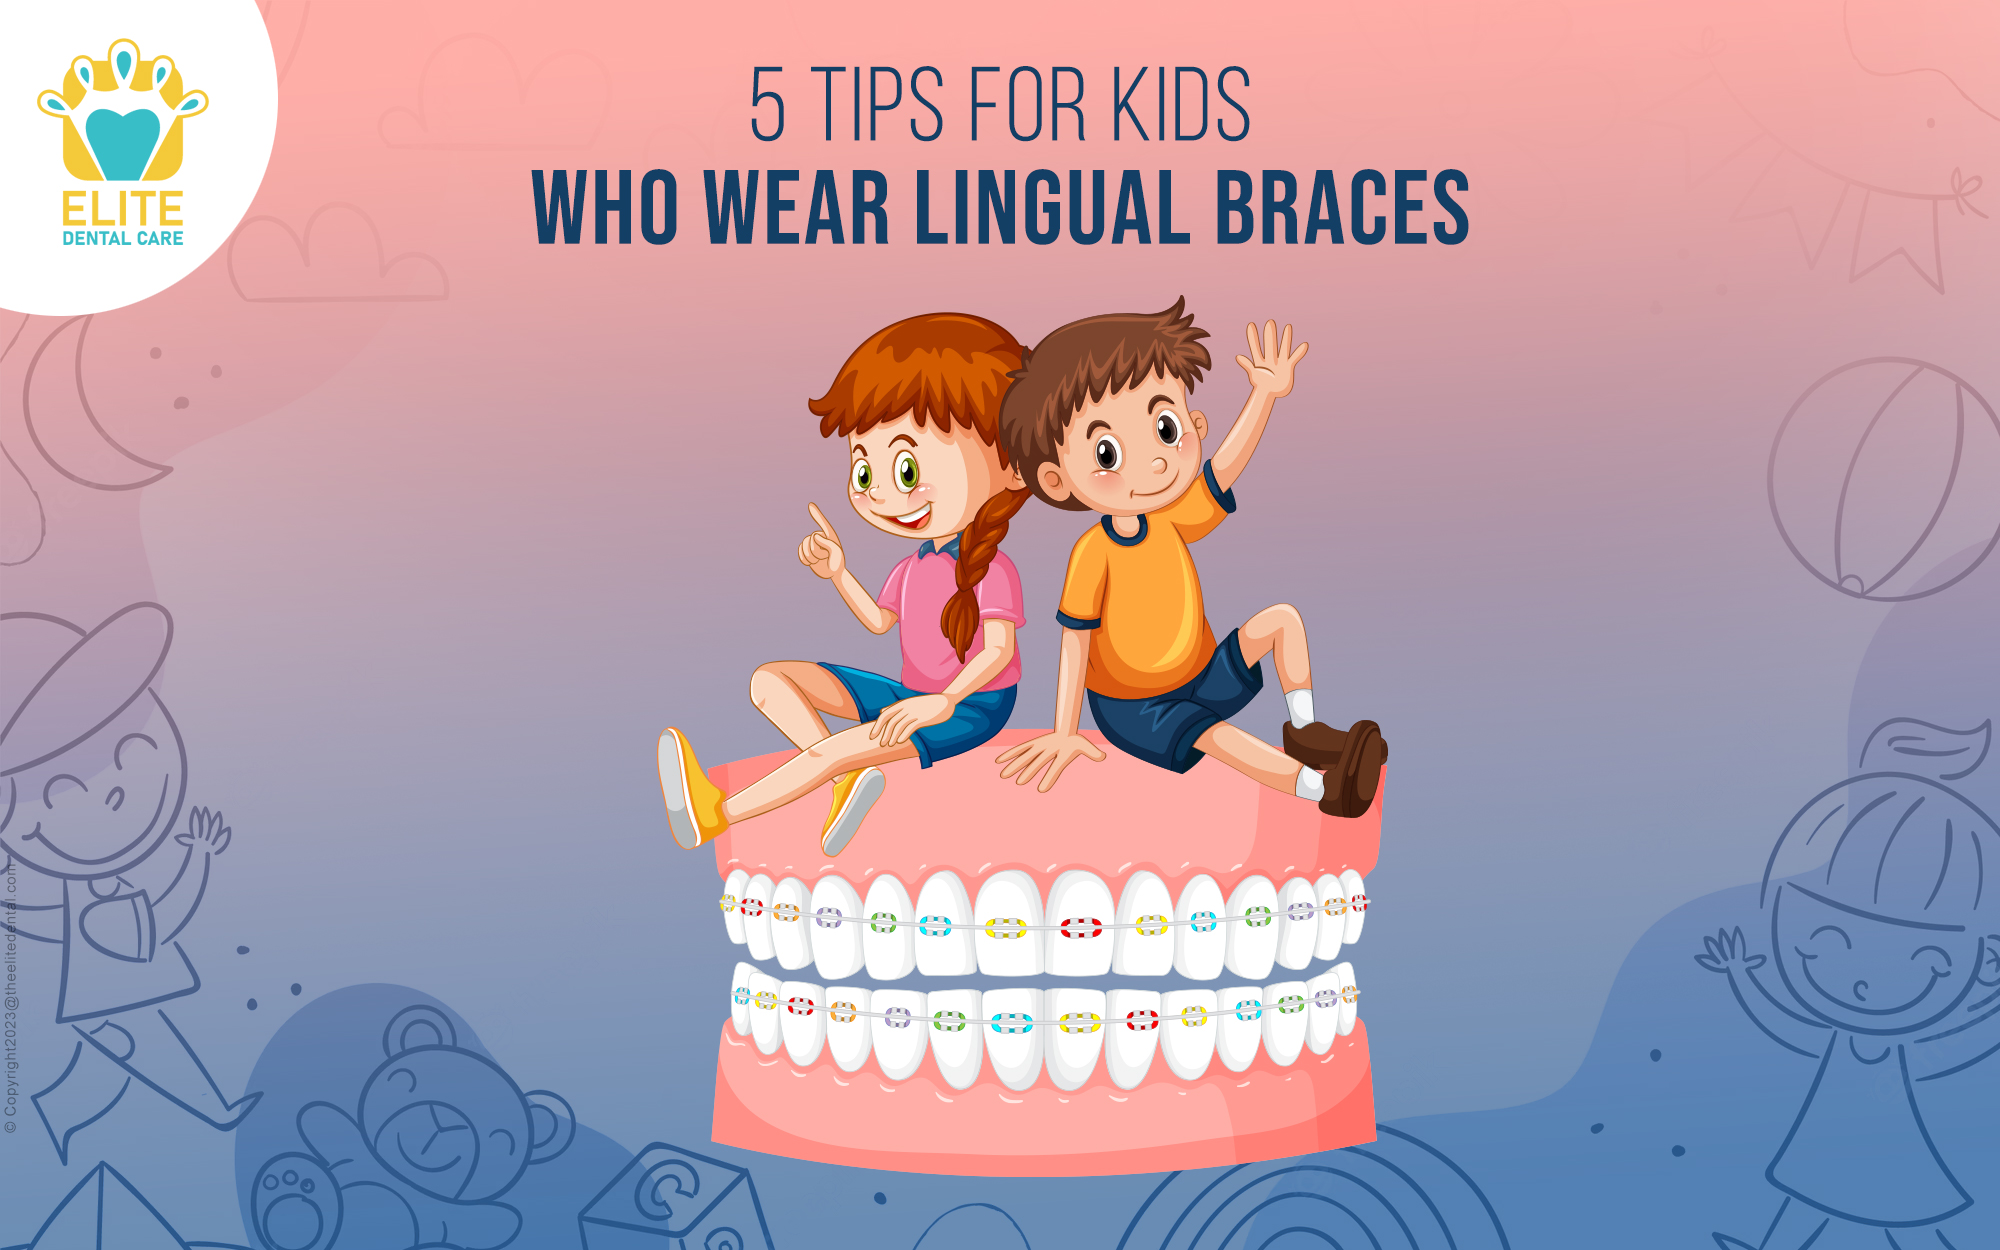 Tips for kids who wear lingual braces